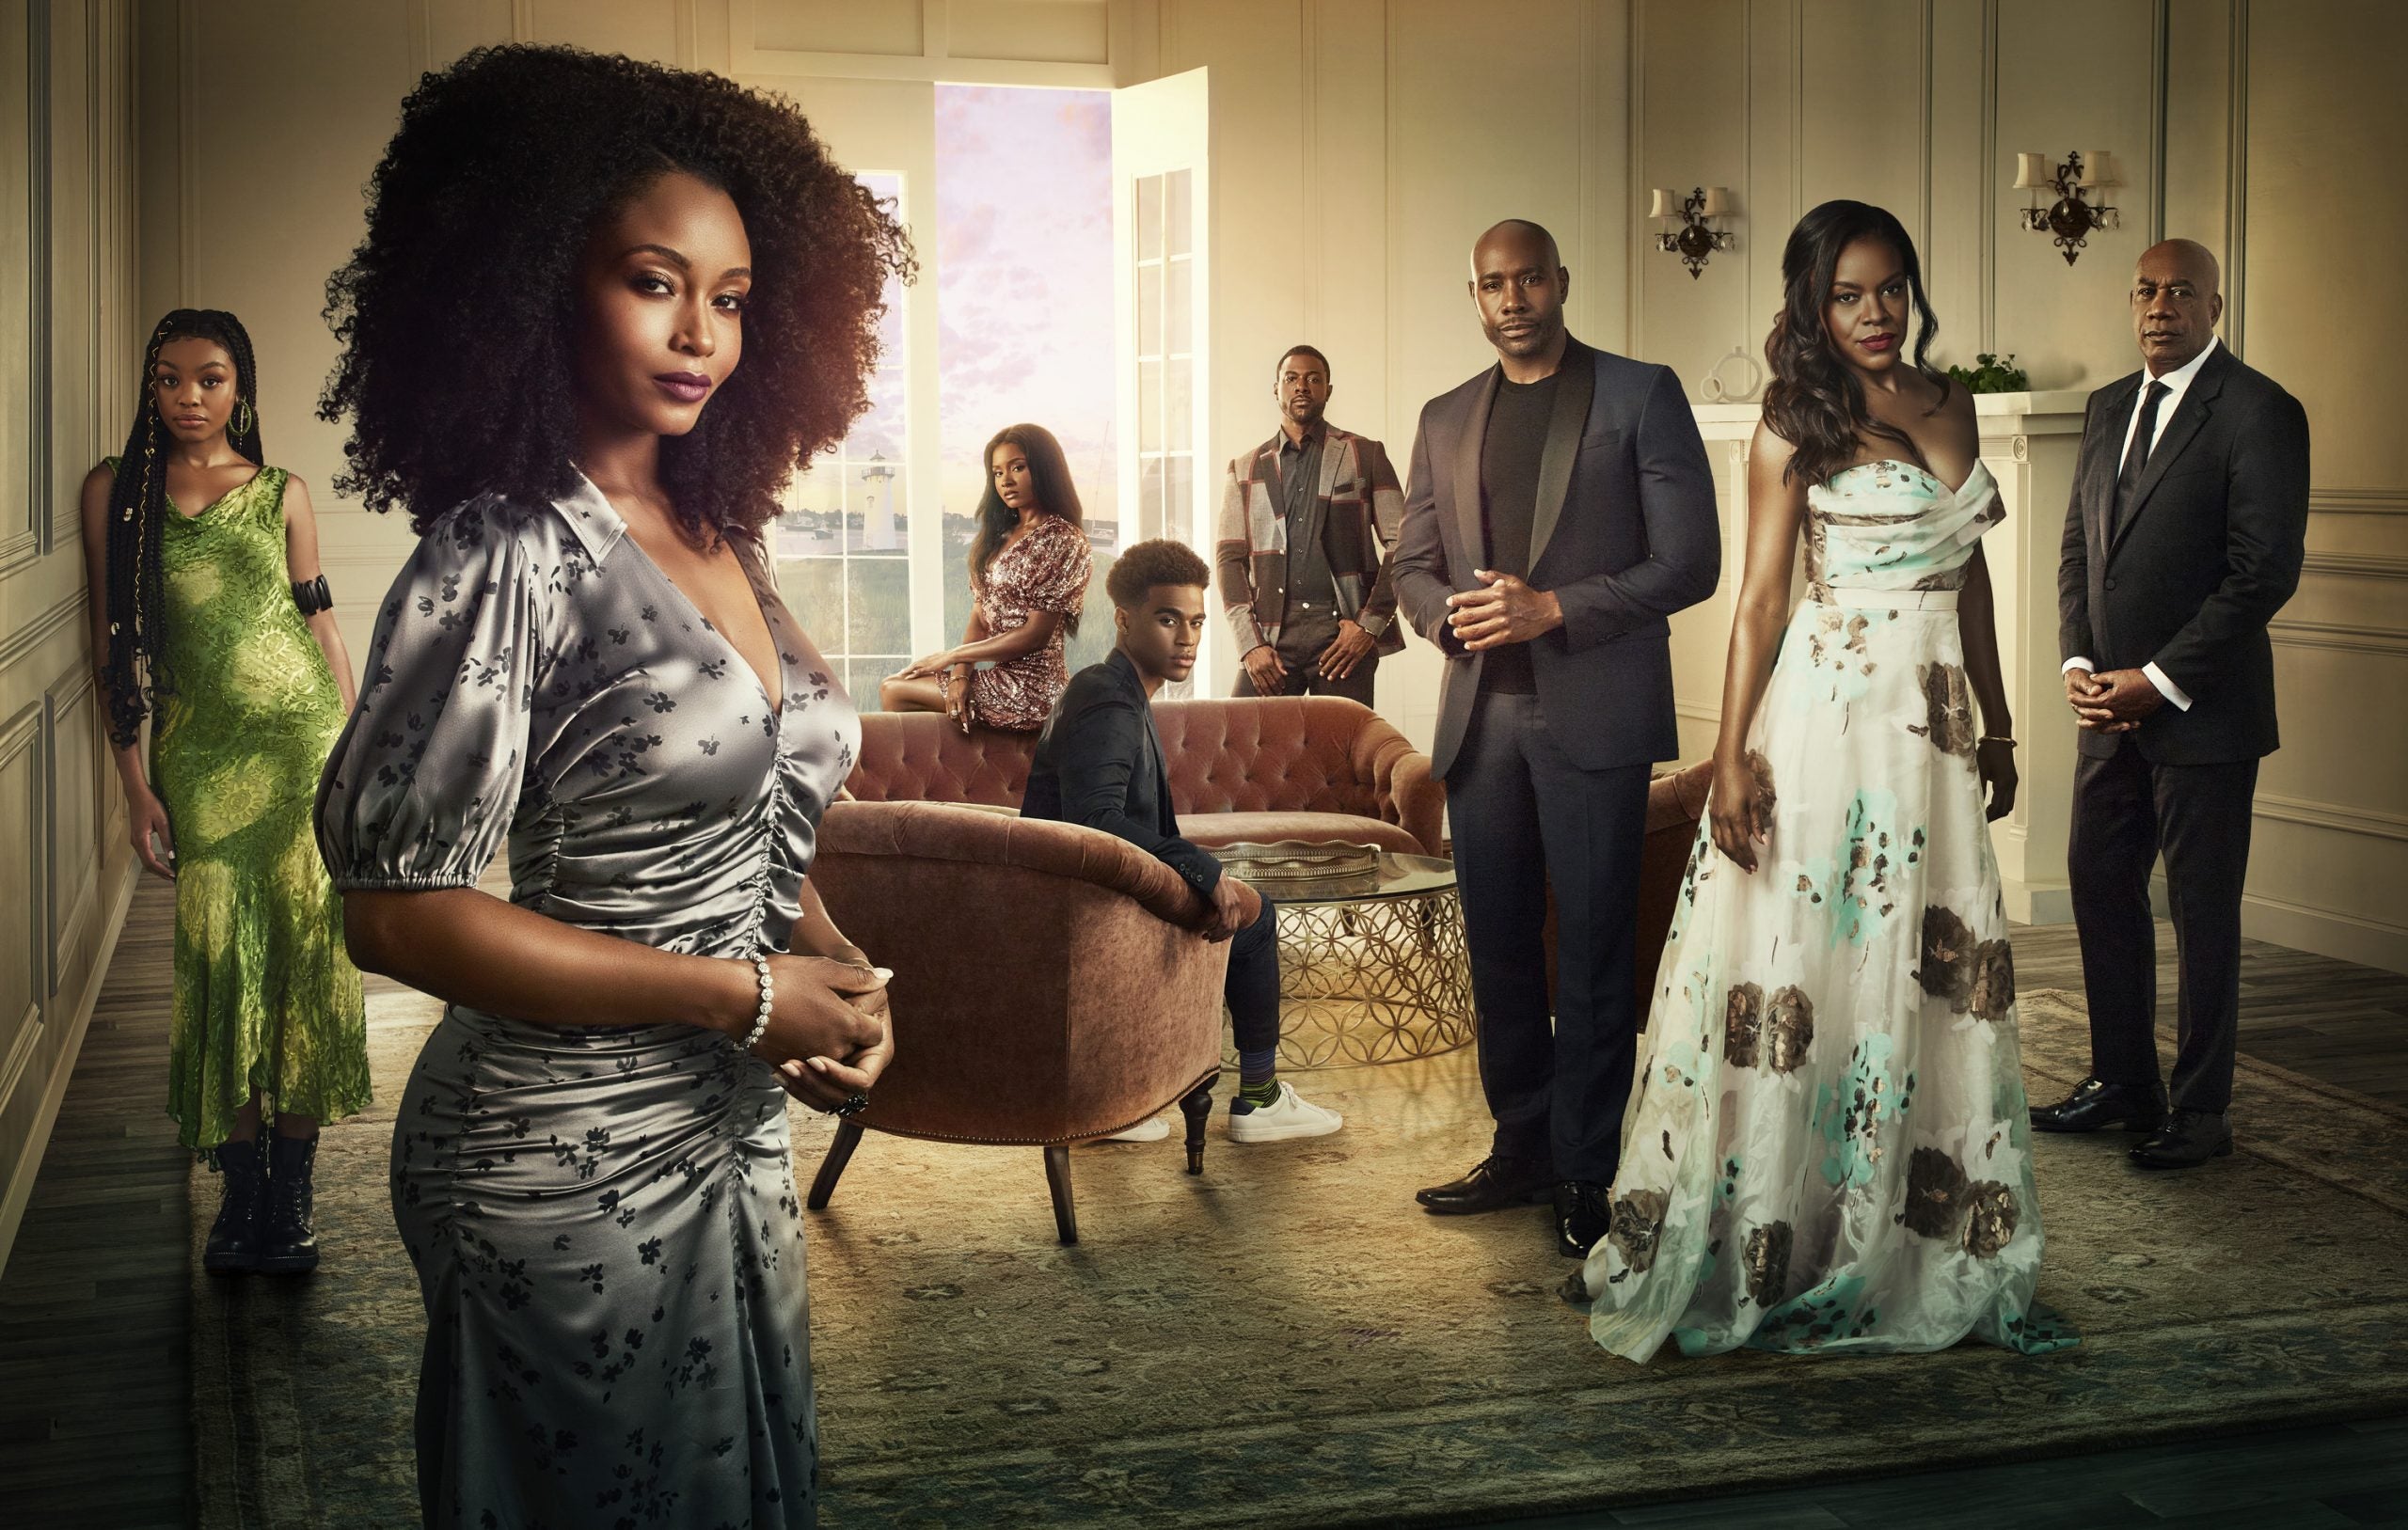 Exclusive: Get Your First Look At The Black Opulence In ‘Our Kind Of People’